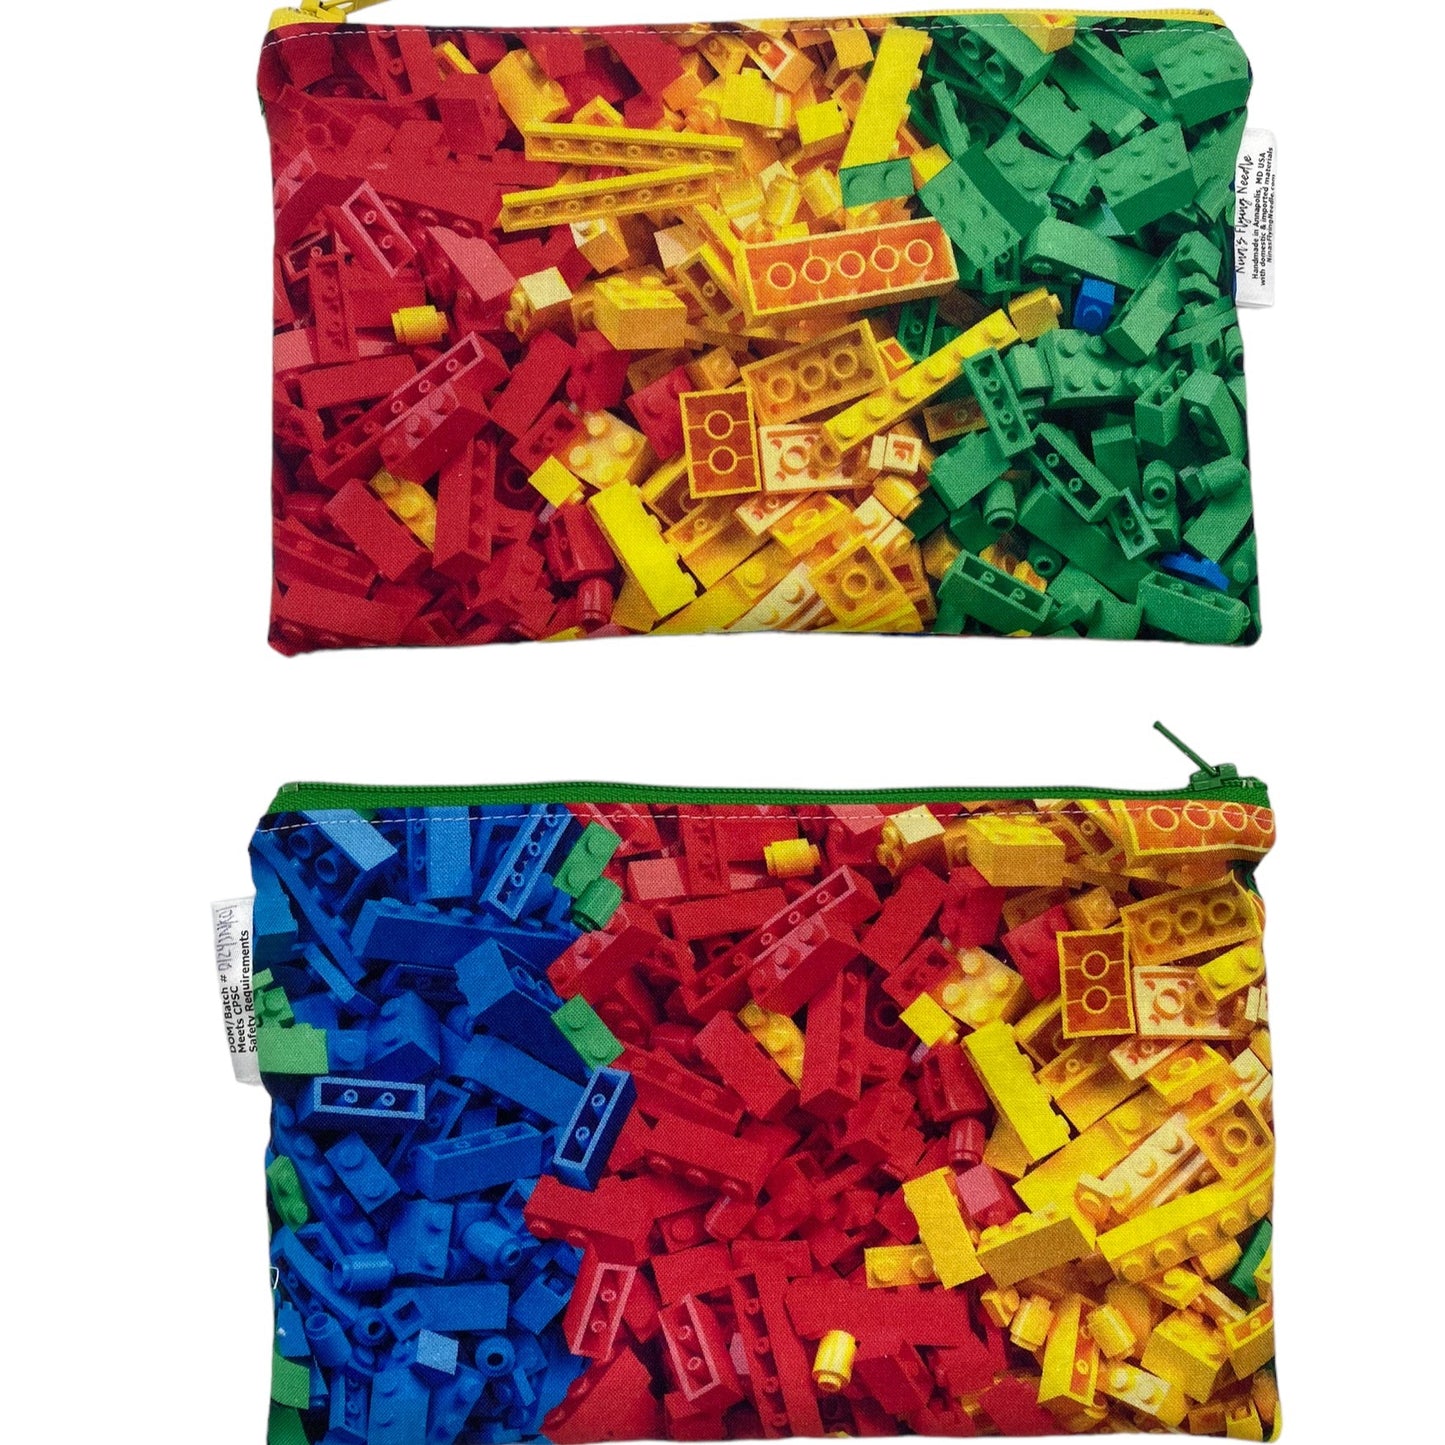 Snack Sized Reusable Zippered Bag Building Bricks Primary